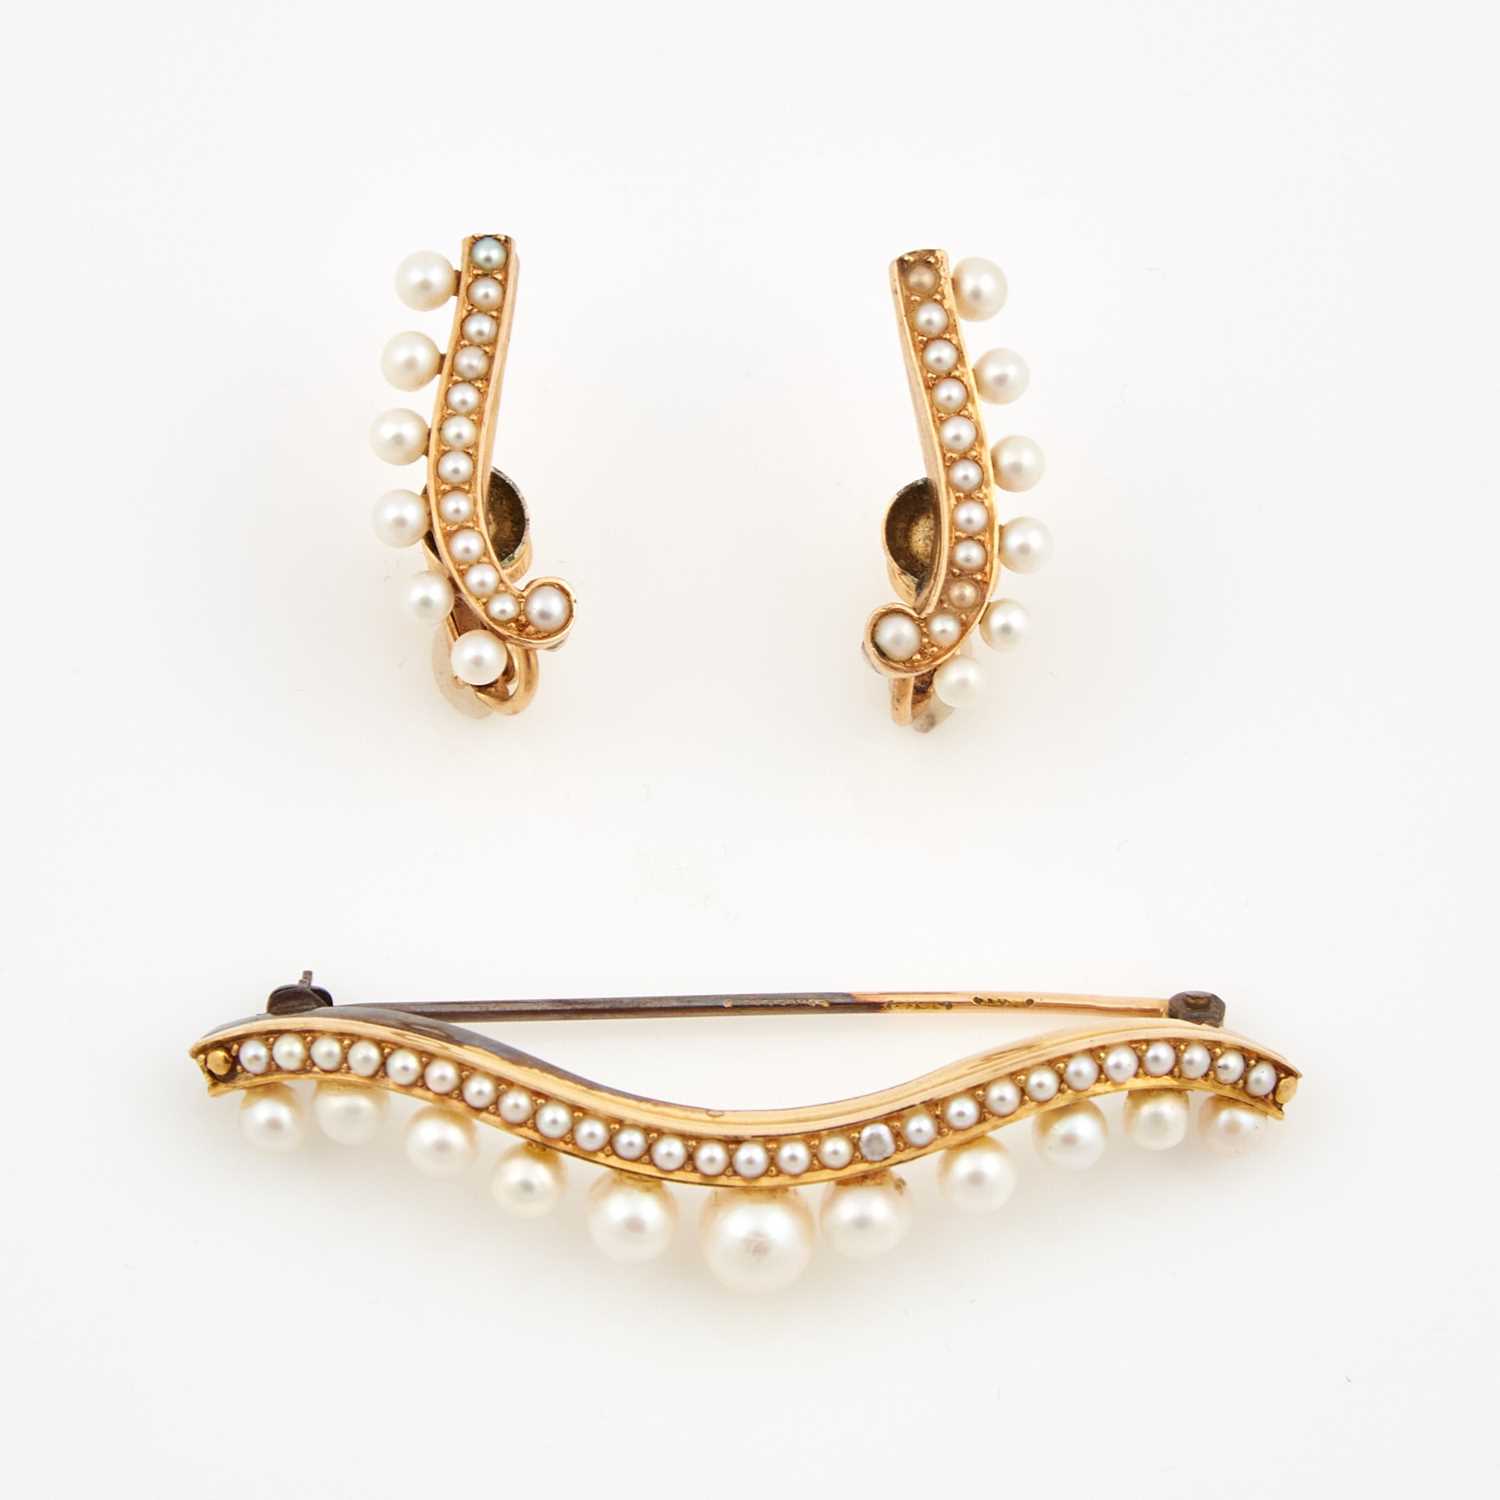 Lot 250 - Two Gold, Bead and Metal Earrings and Pin, 18K, 14K and Metal 13 dwt. all